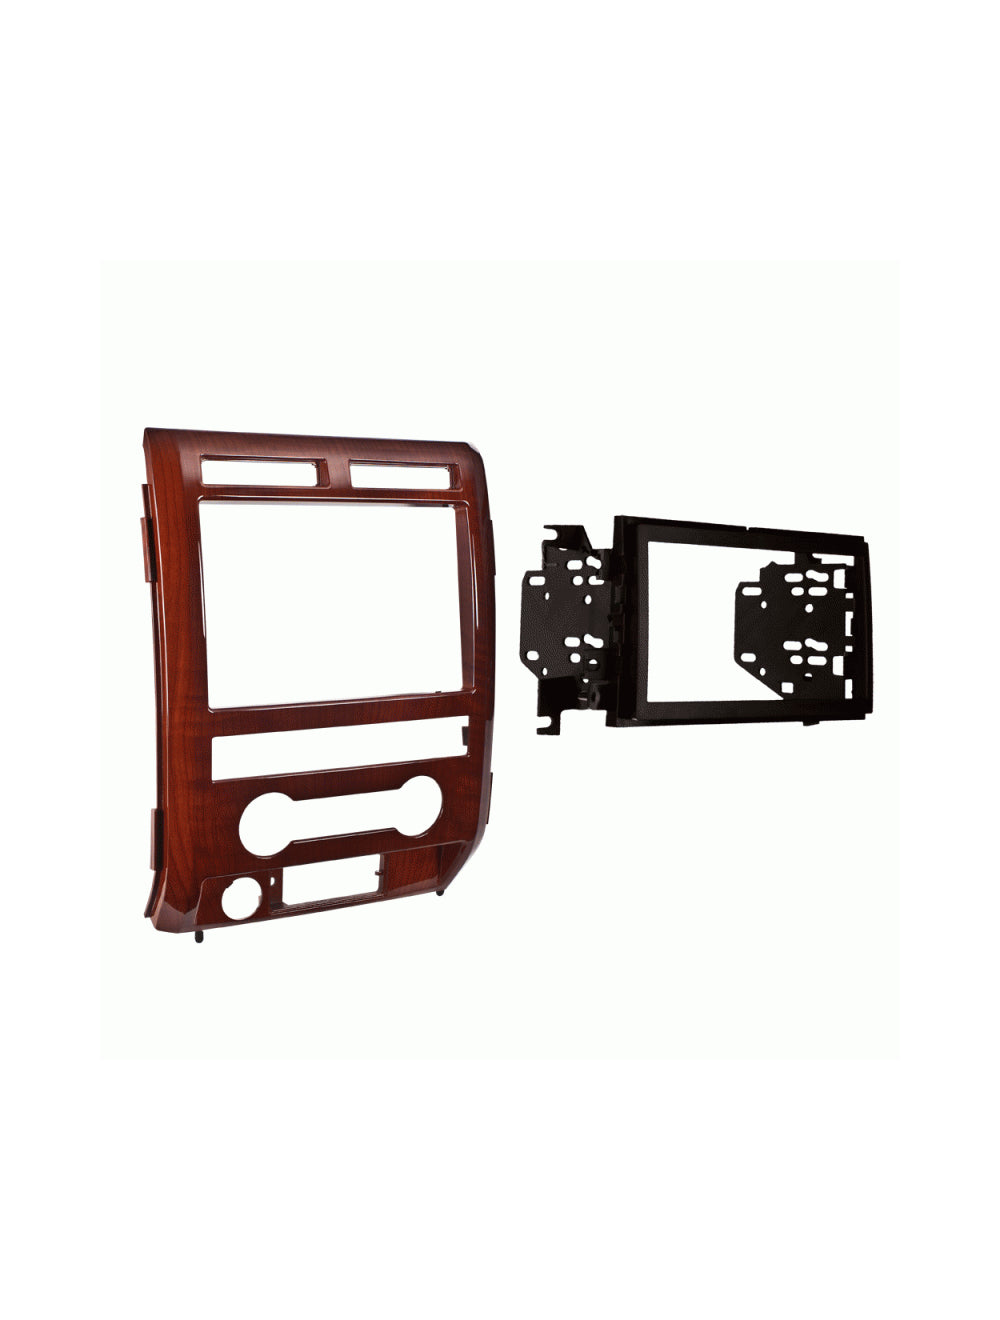 Metra 95-5822MM Double DIN Installation Dash Kit for 2009-2010 Ford F-150 Lariat NAV Equipped Models Milano Maple